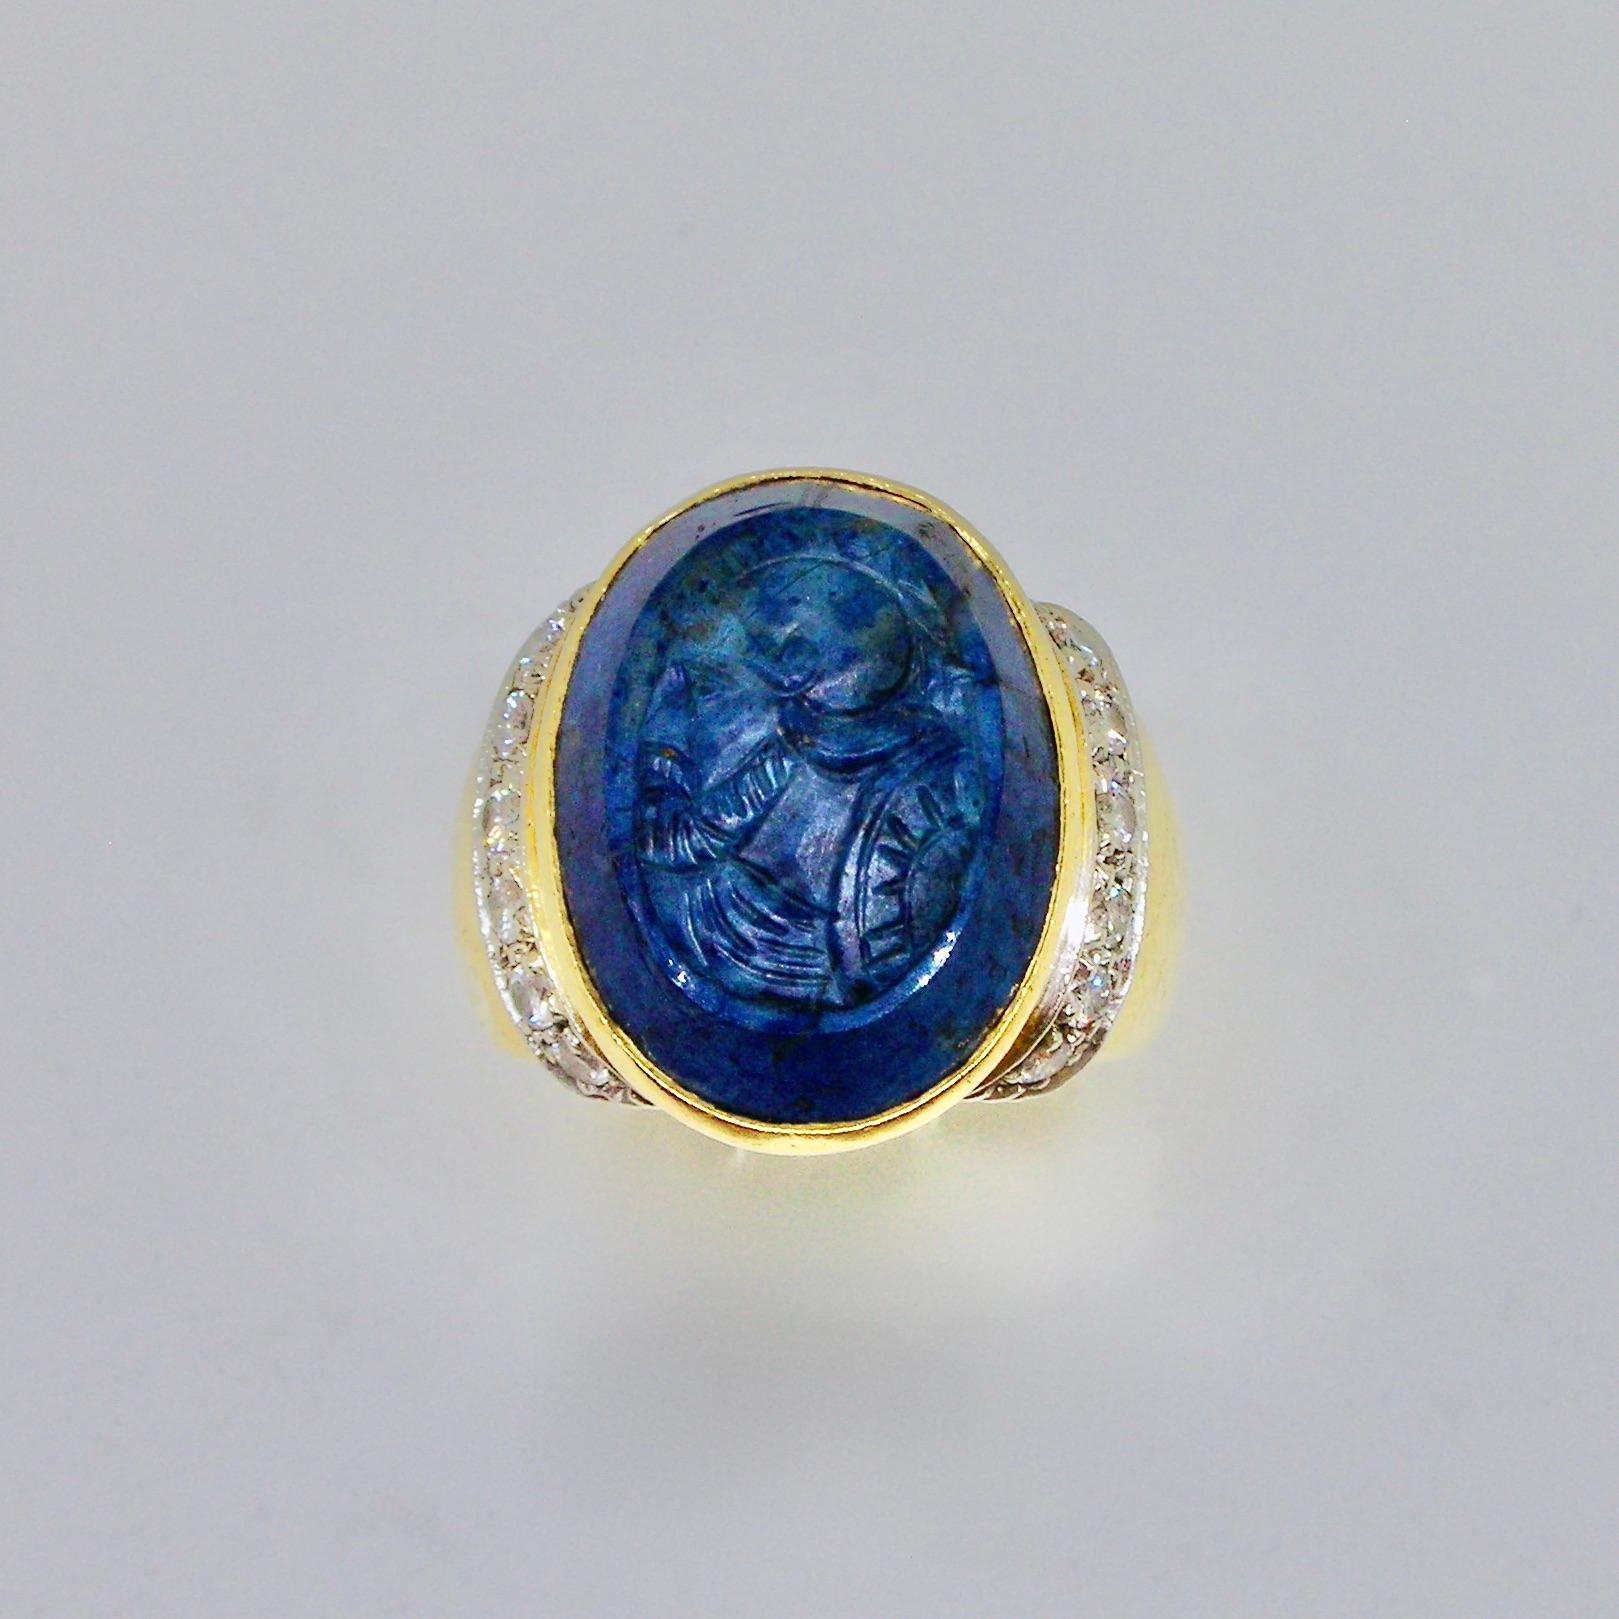 Ring in 18ct gold with unusual hand carved cameo on sodalite, flanked by round cut diamonds of circa 0,40ct in total. 1980s period circa.

Highlights

- 18ct white & yellow gold 
- Sodalite carved stone
- Round brillant cut diamonds
- 1980s